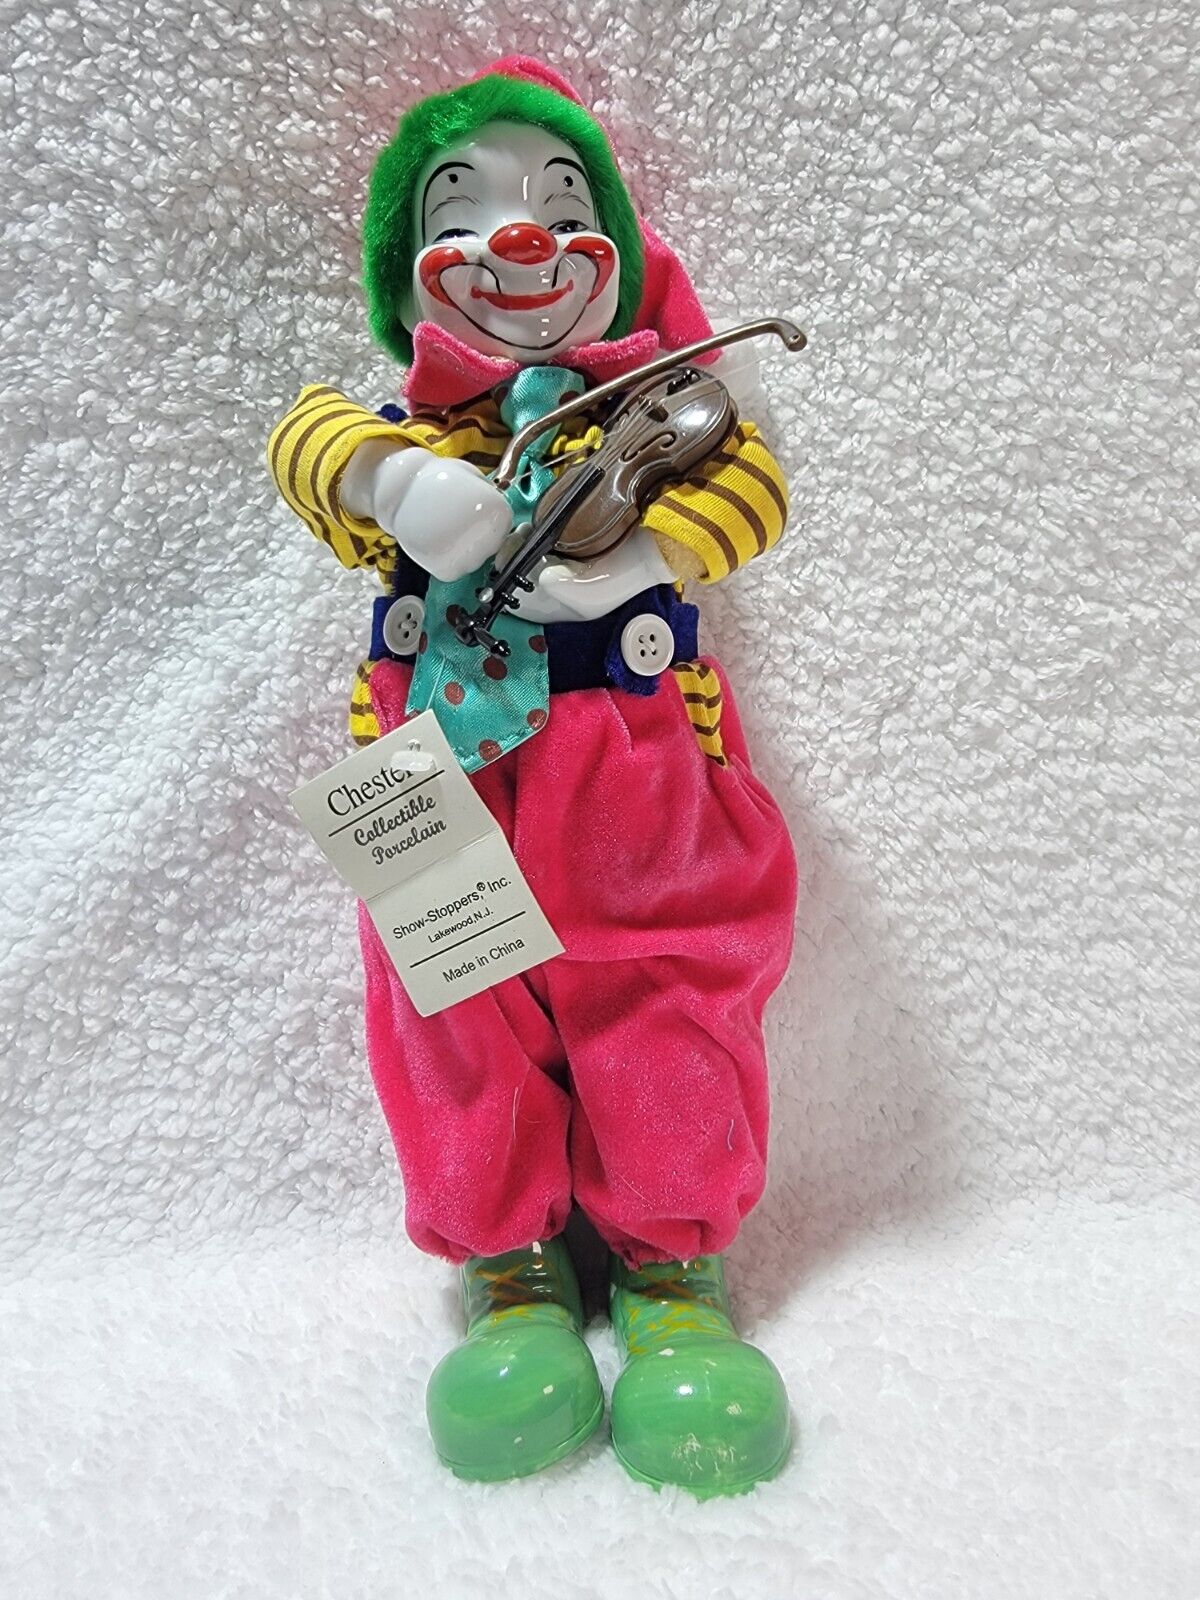 Show-Stoppers CHESTER Collectible Porcelain Wind Up Moving Musical Clown Doll